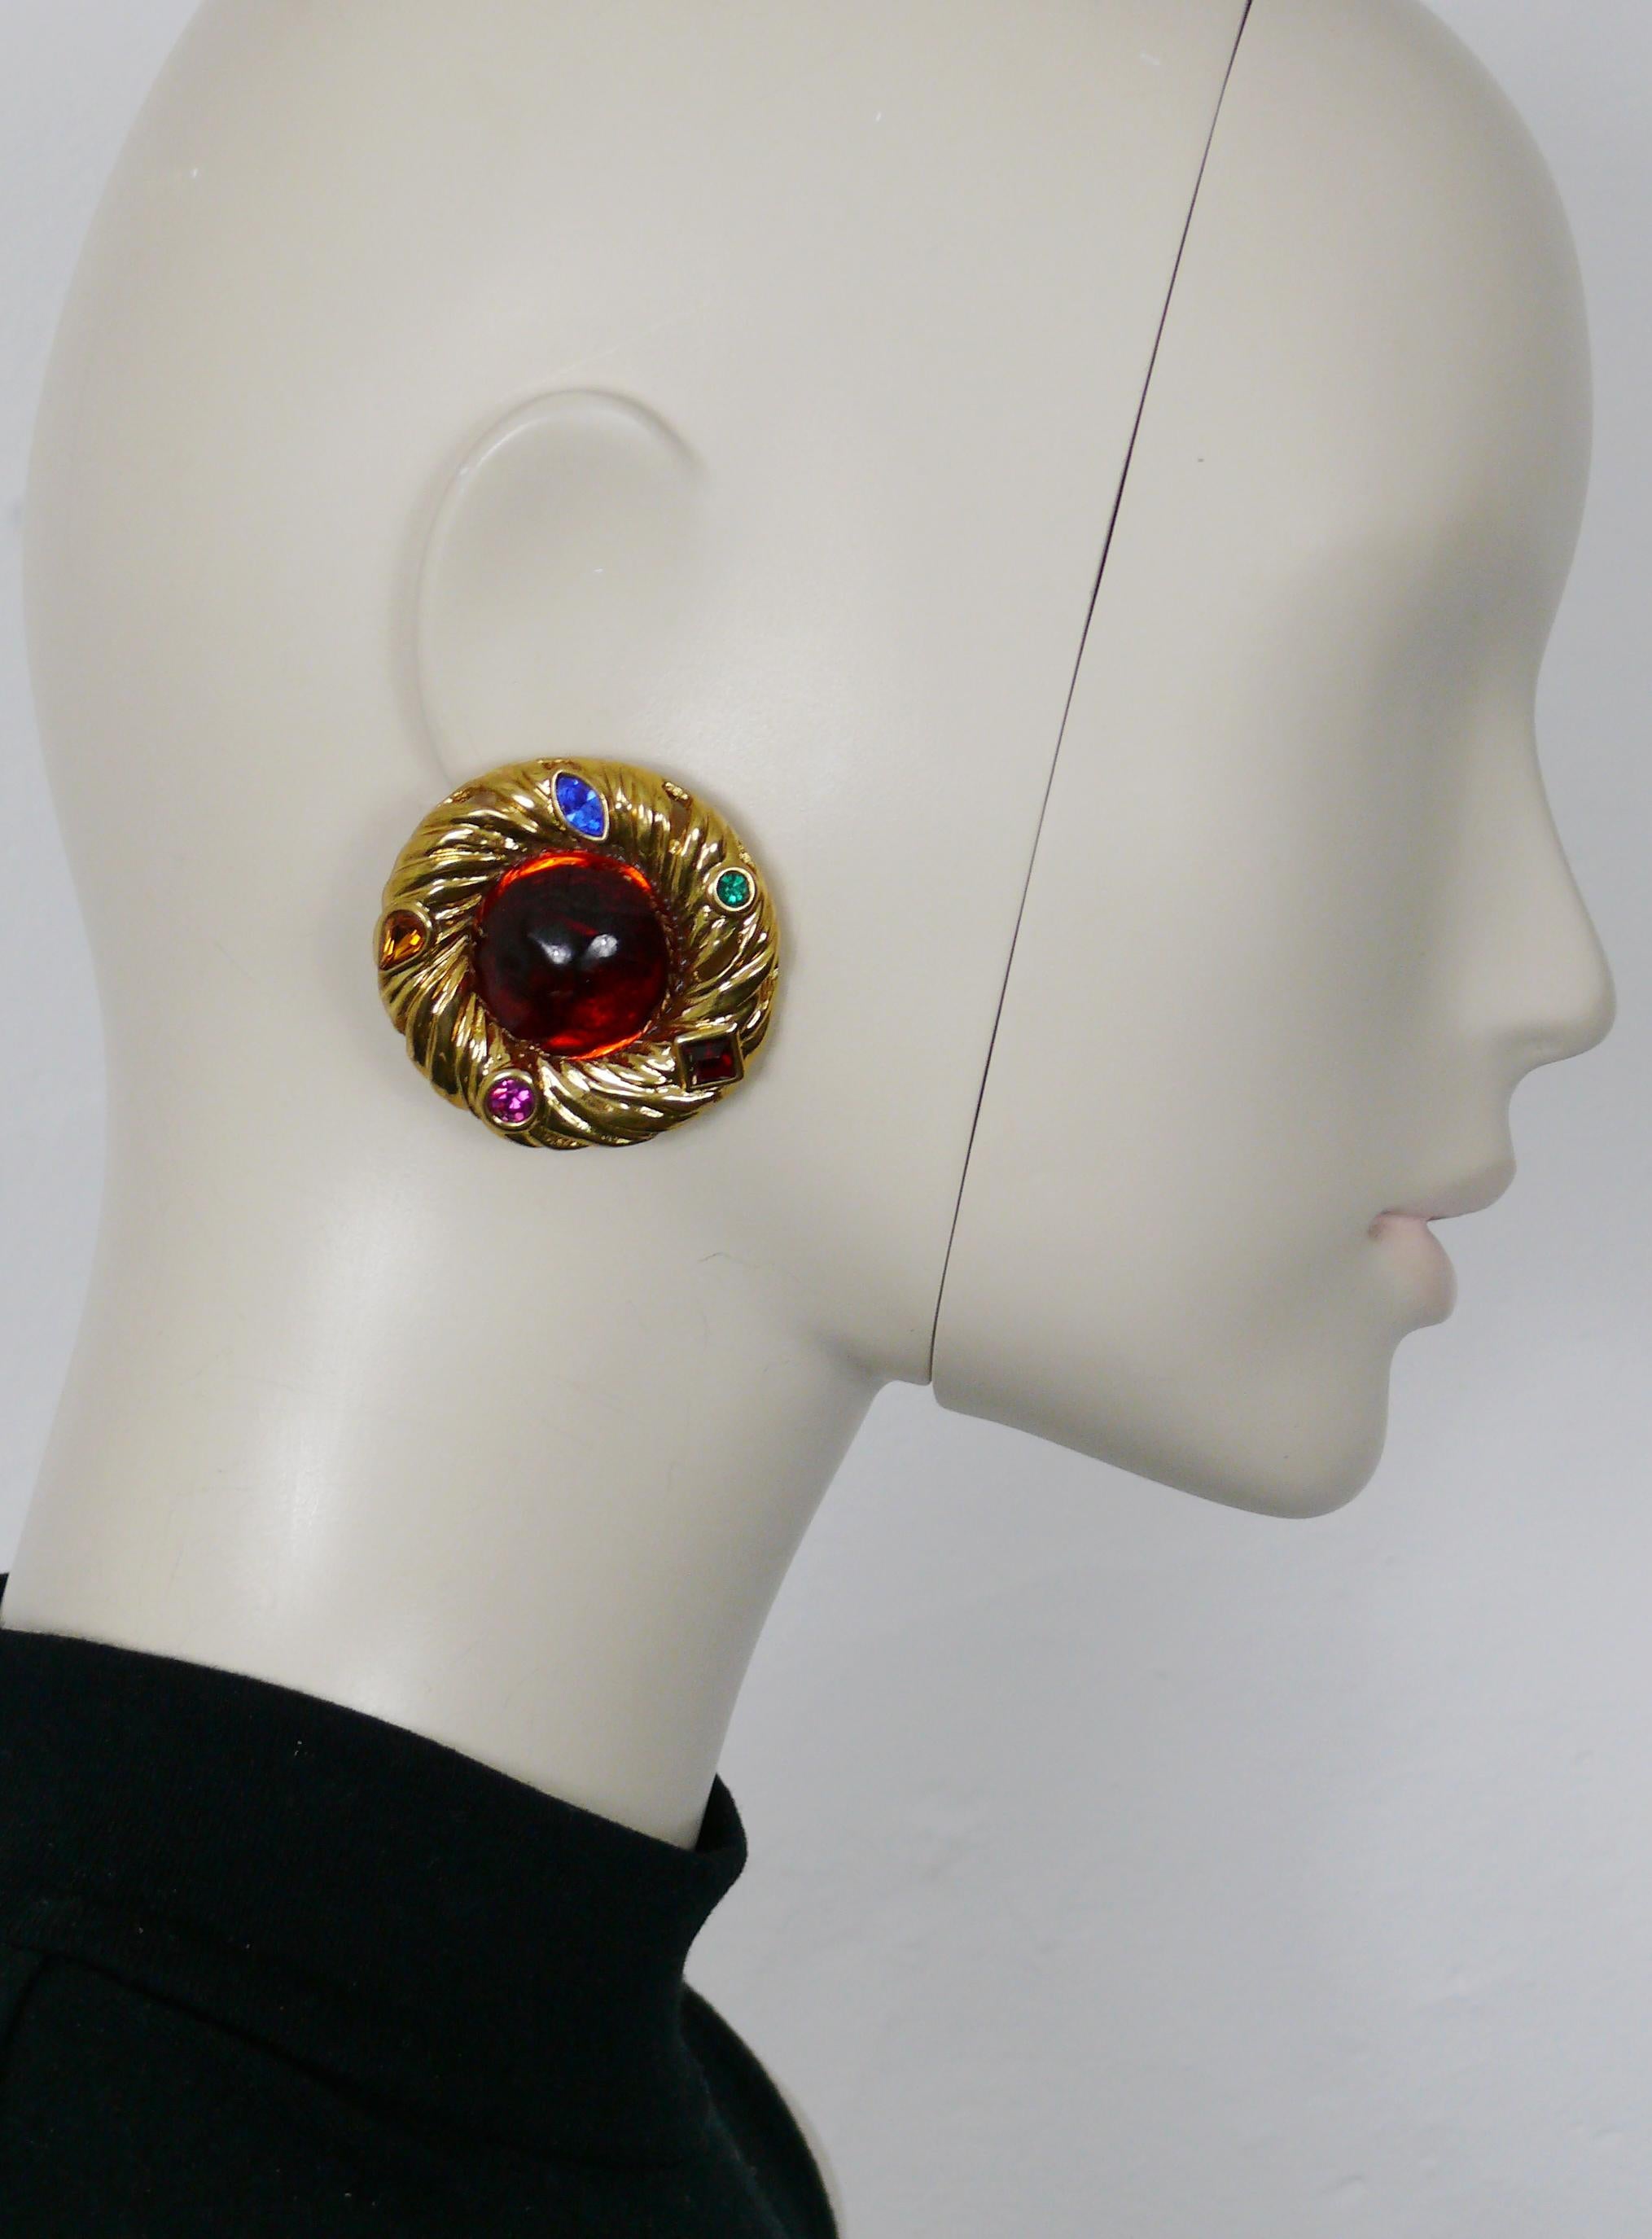 YVES SAINT LAURENT vintage gold toned nest design clip-on earrings embellished with a large red resin cabochon at center surrounded by multicolored crystals.

Embossed YSL Made in France.

Indicative measurements : diameter approx. 4.5 cm (1.77